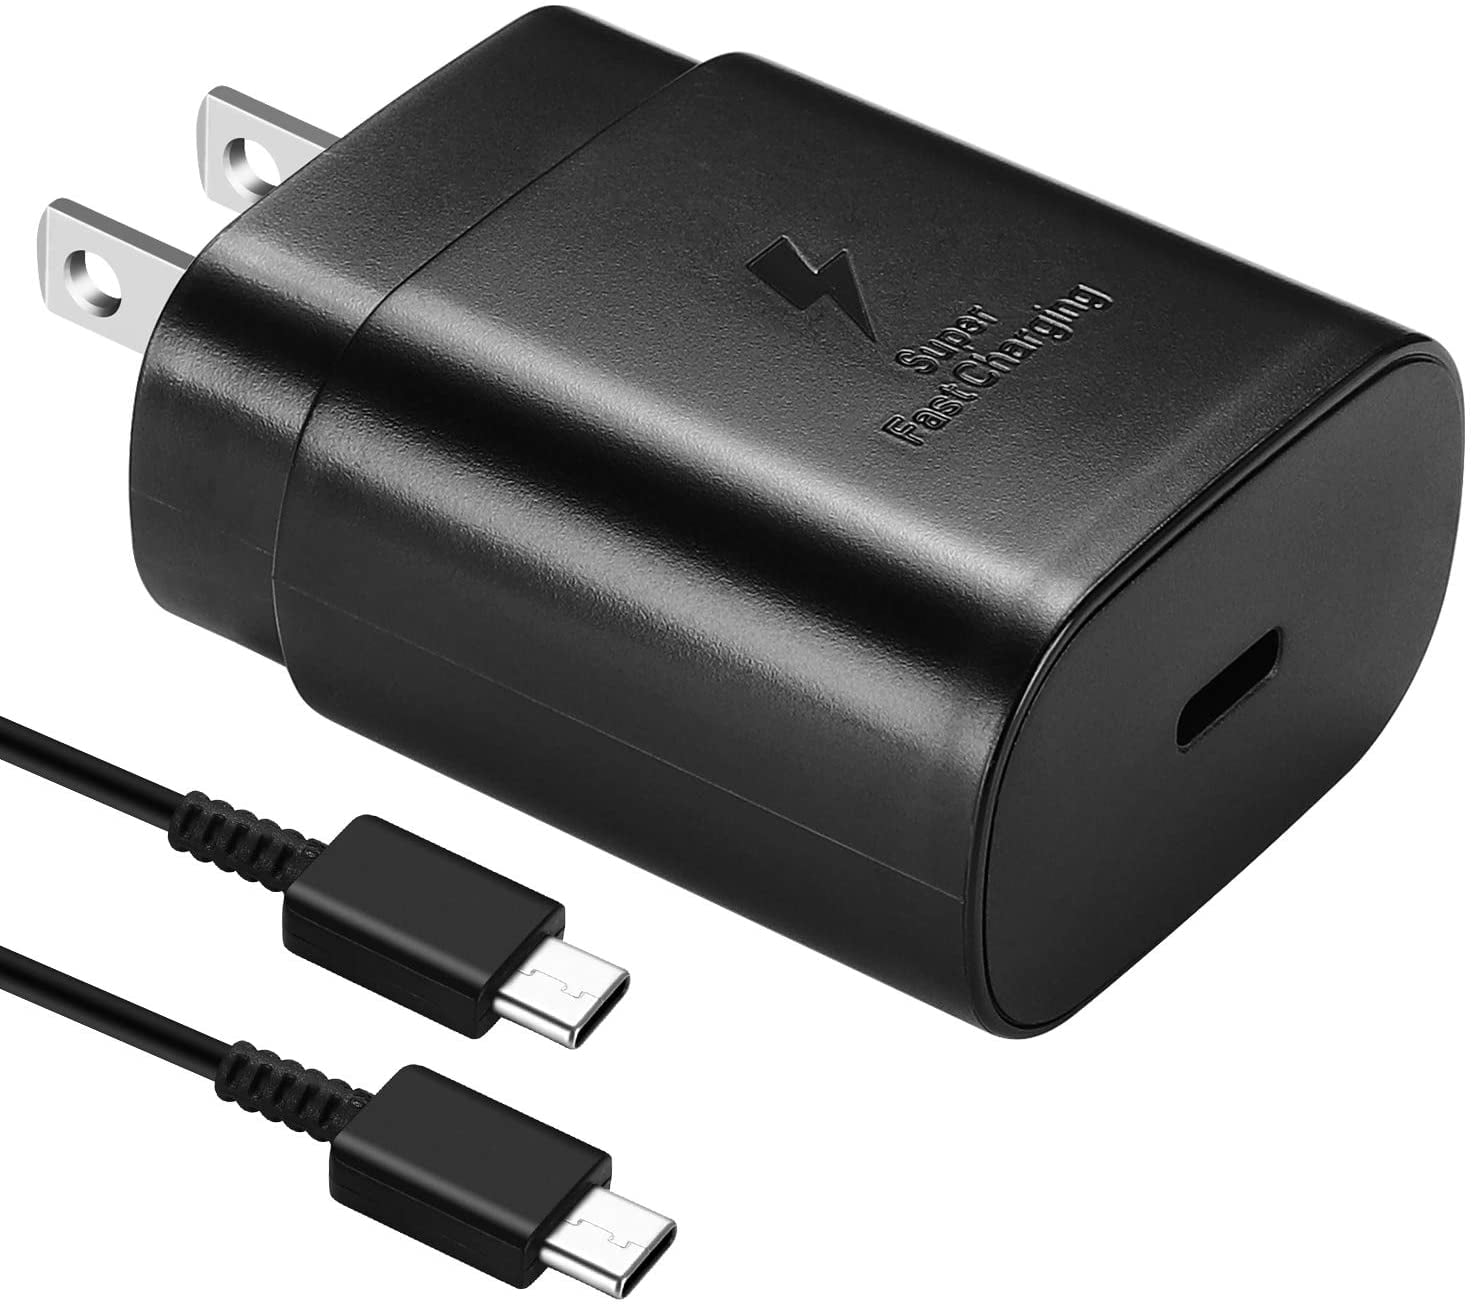 Turbo Fast 15W Car Charger Works for Samsung Galaxy S20 FE Includes Detachable Hi-Power USB Type-C Cable! 